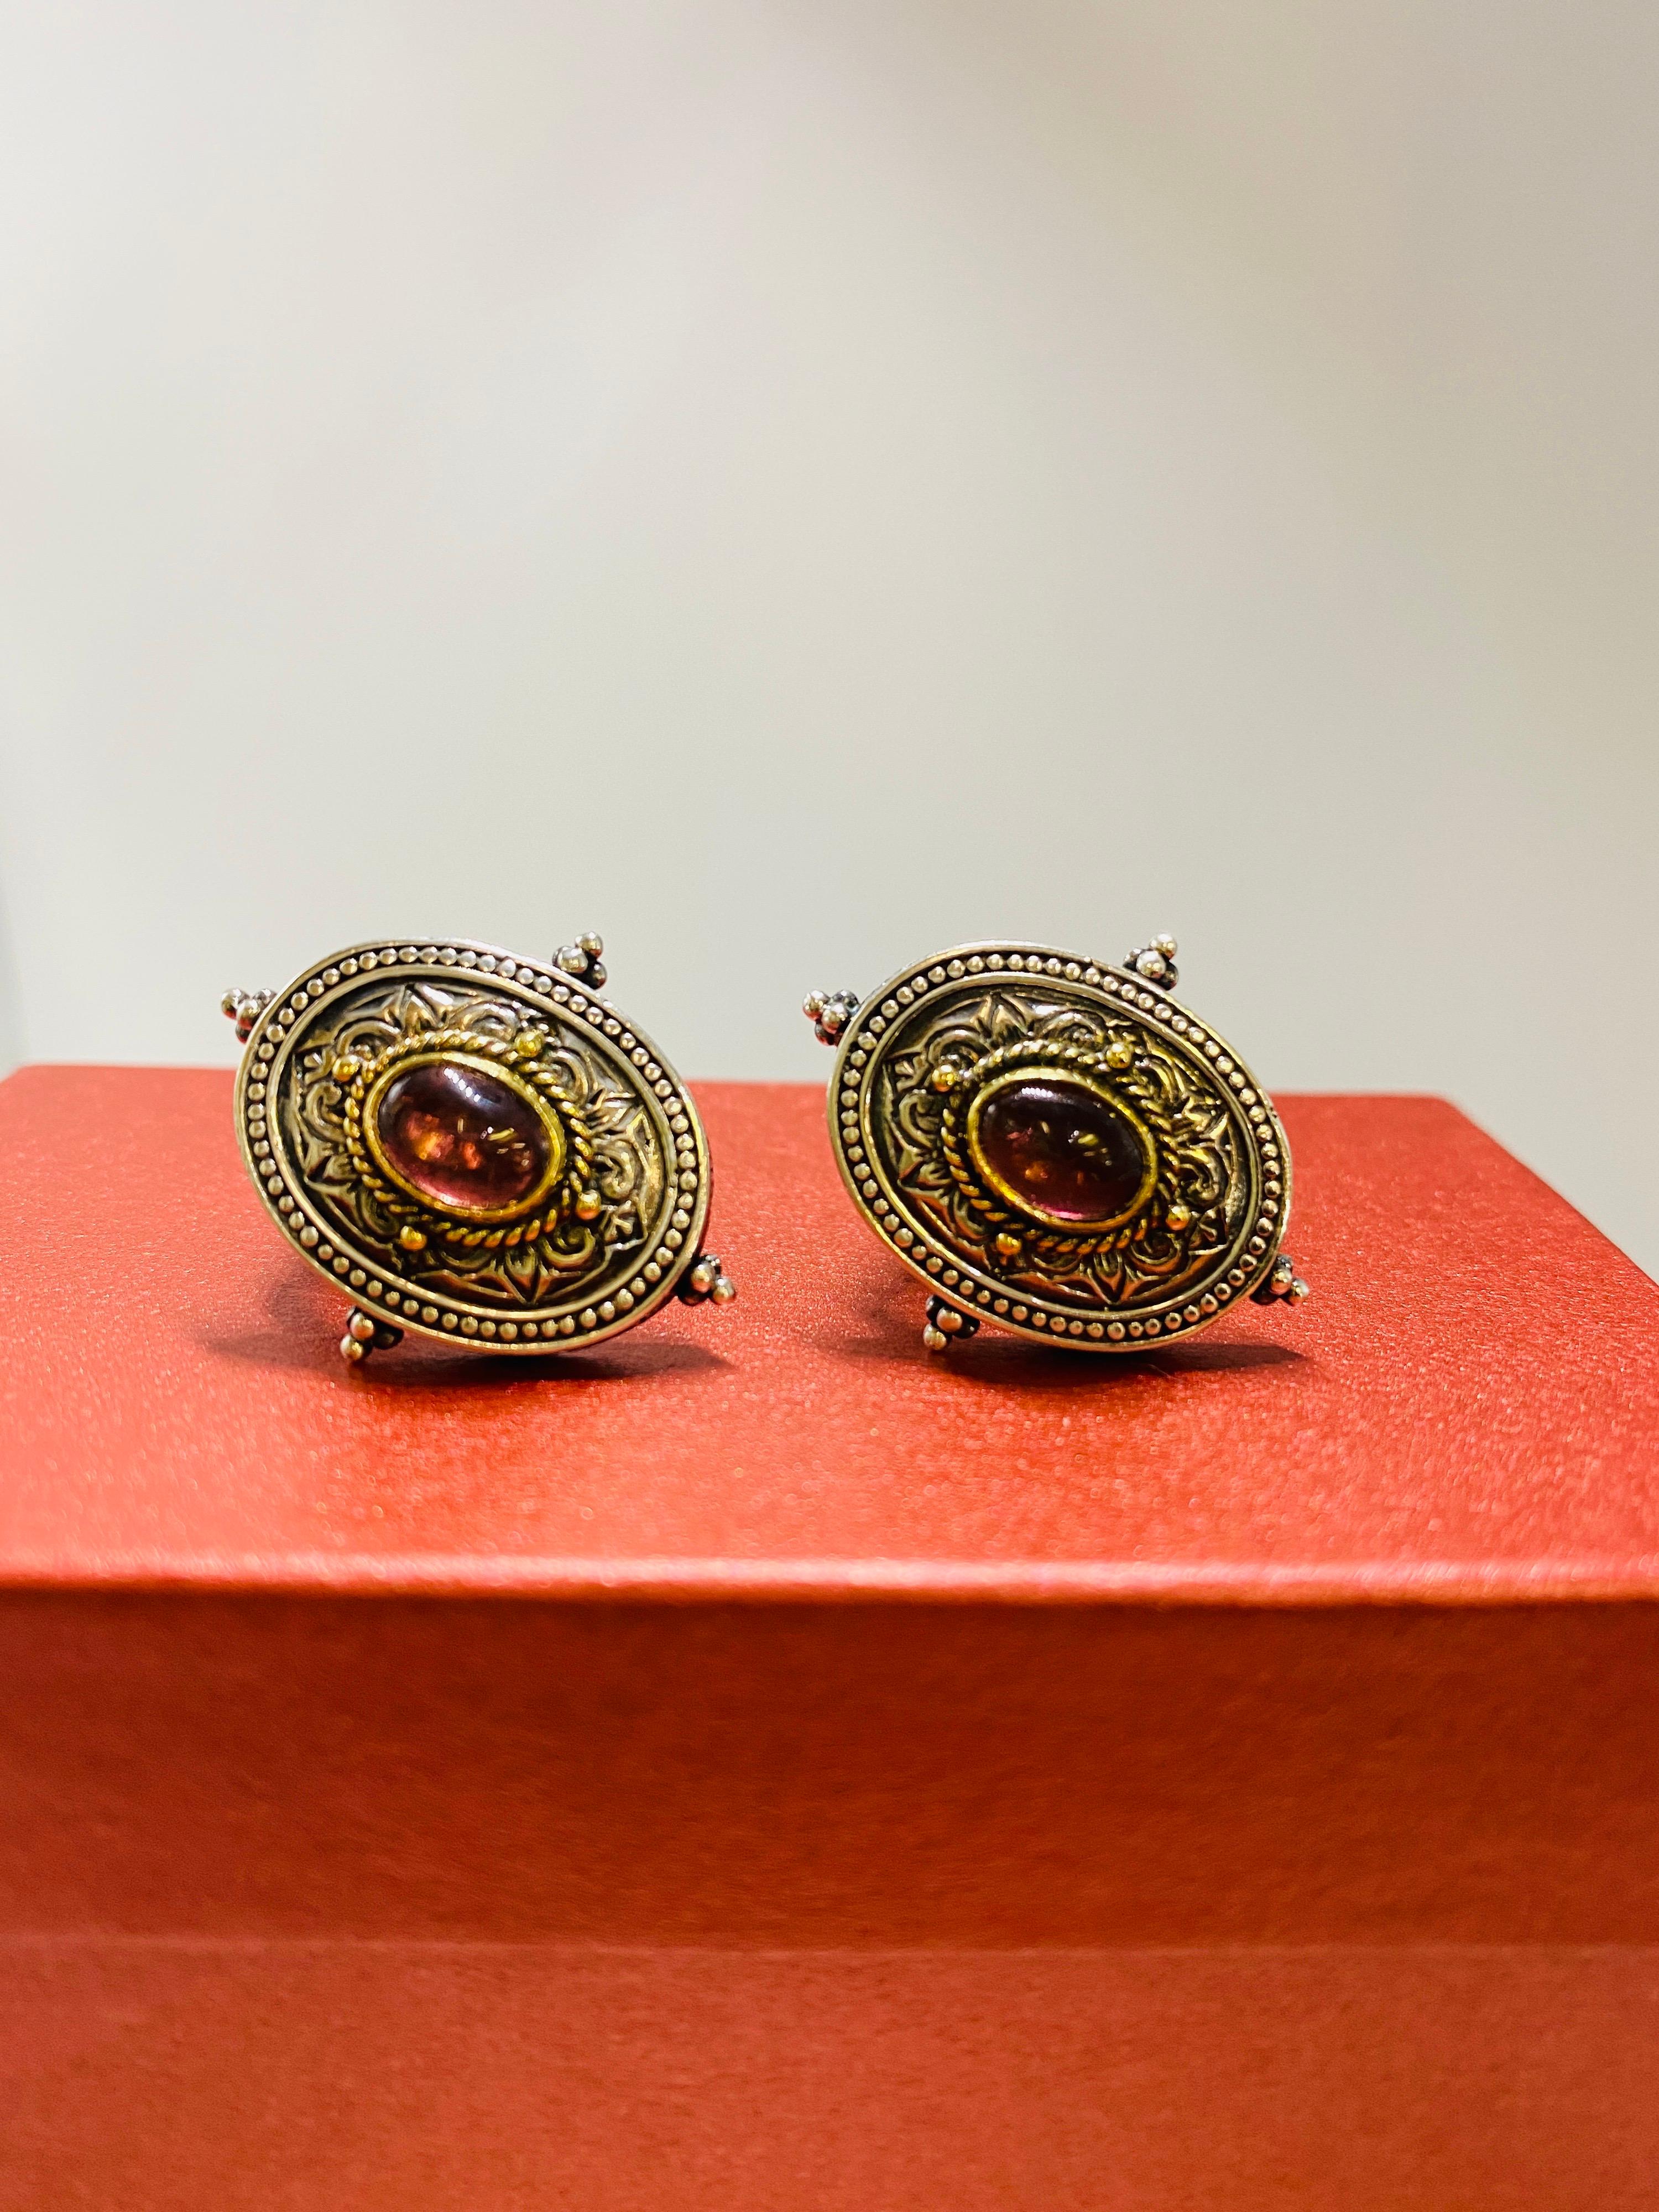 Konstantino sterling silver and 18k yellow gold clip earrings with pink tourmaline. 